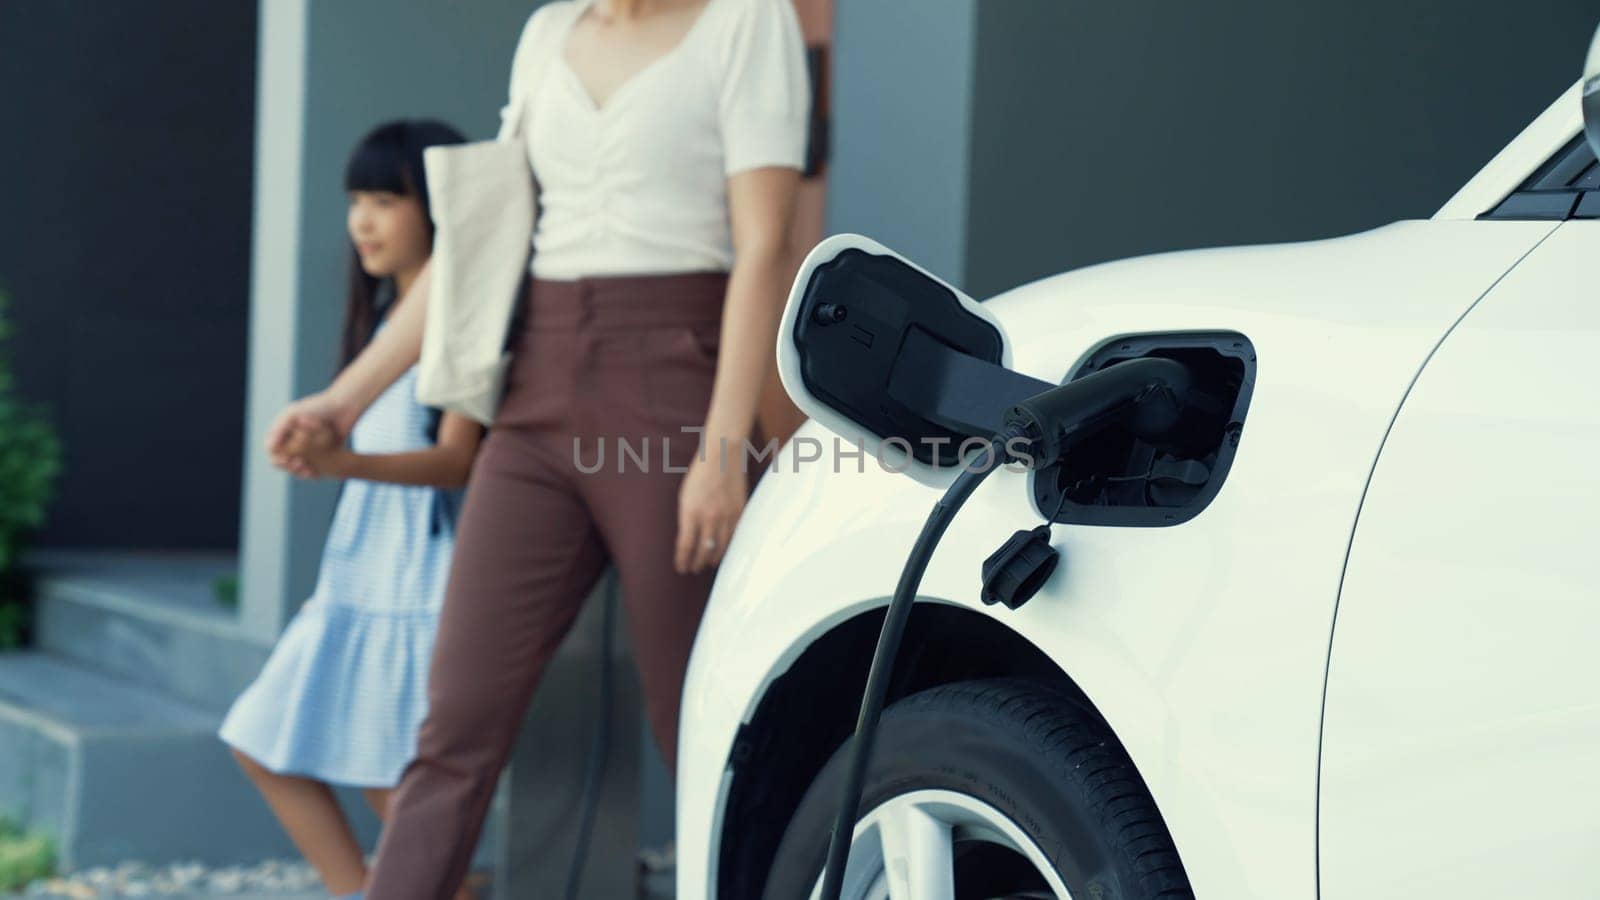 Progressive lifestyle of mother and daughter with EV car and charging station. by biancoblue